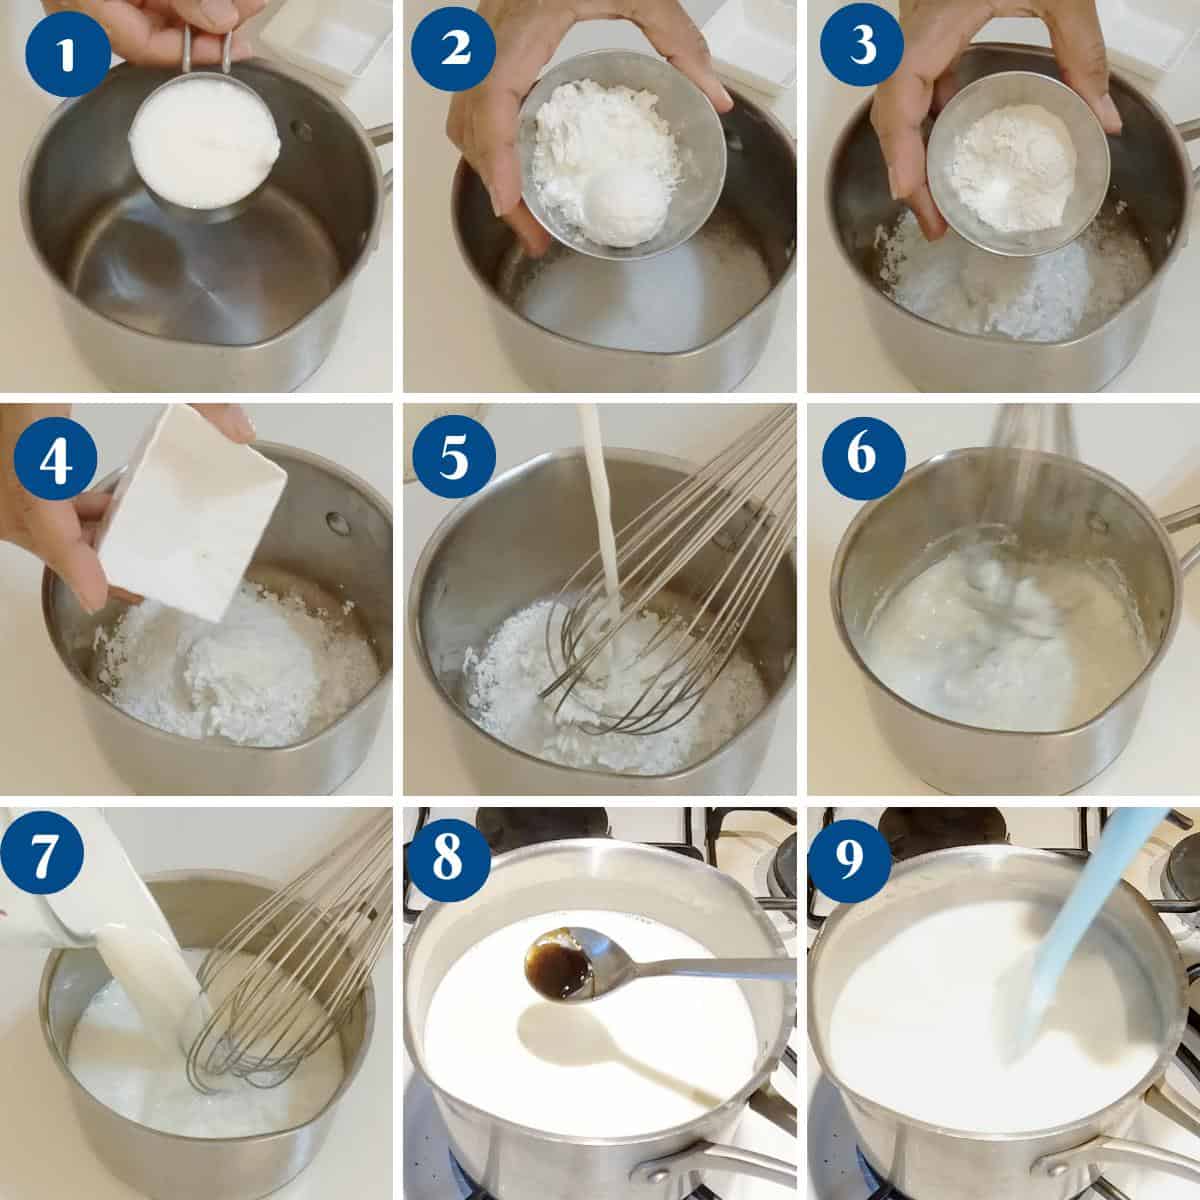 Progress pictures for pastry cream made eggless.